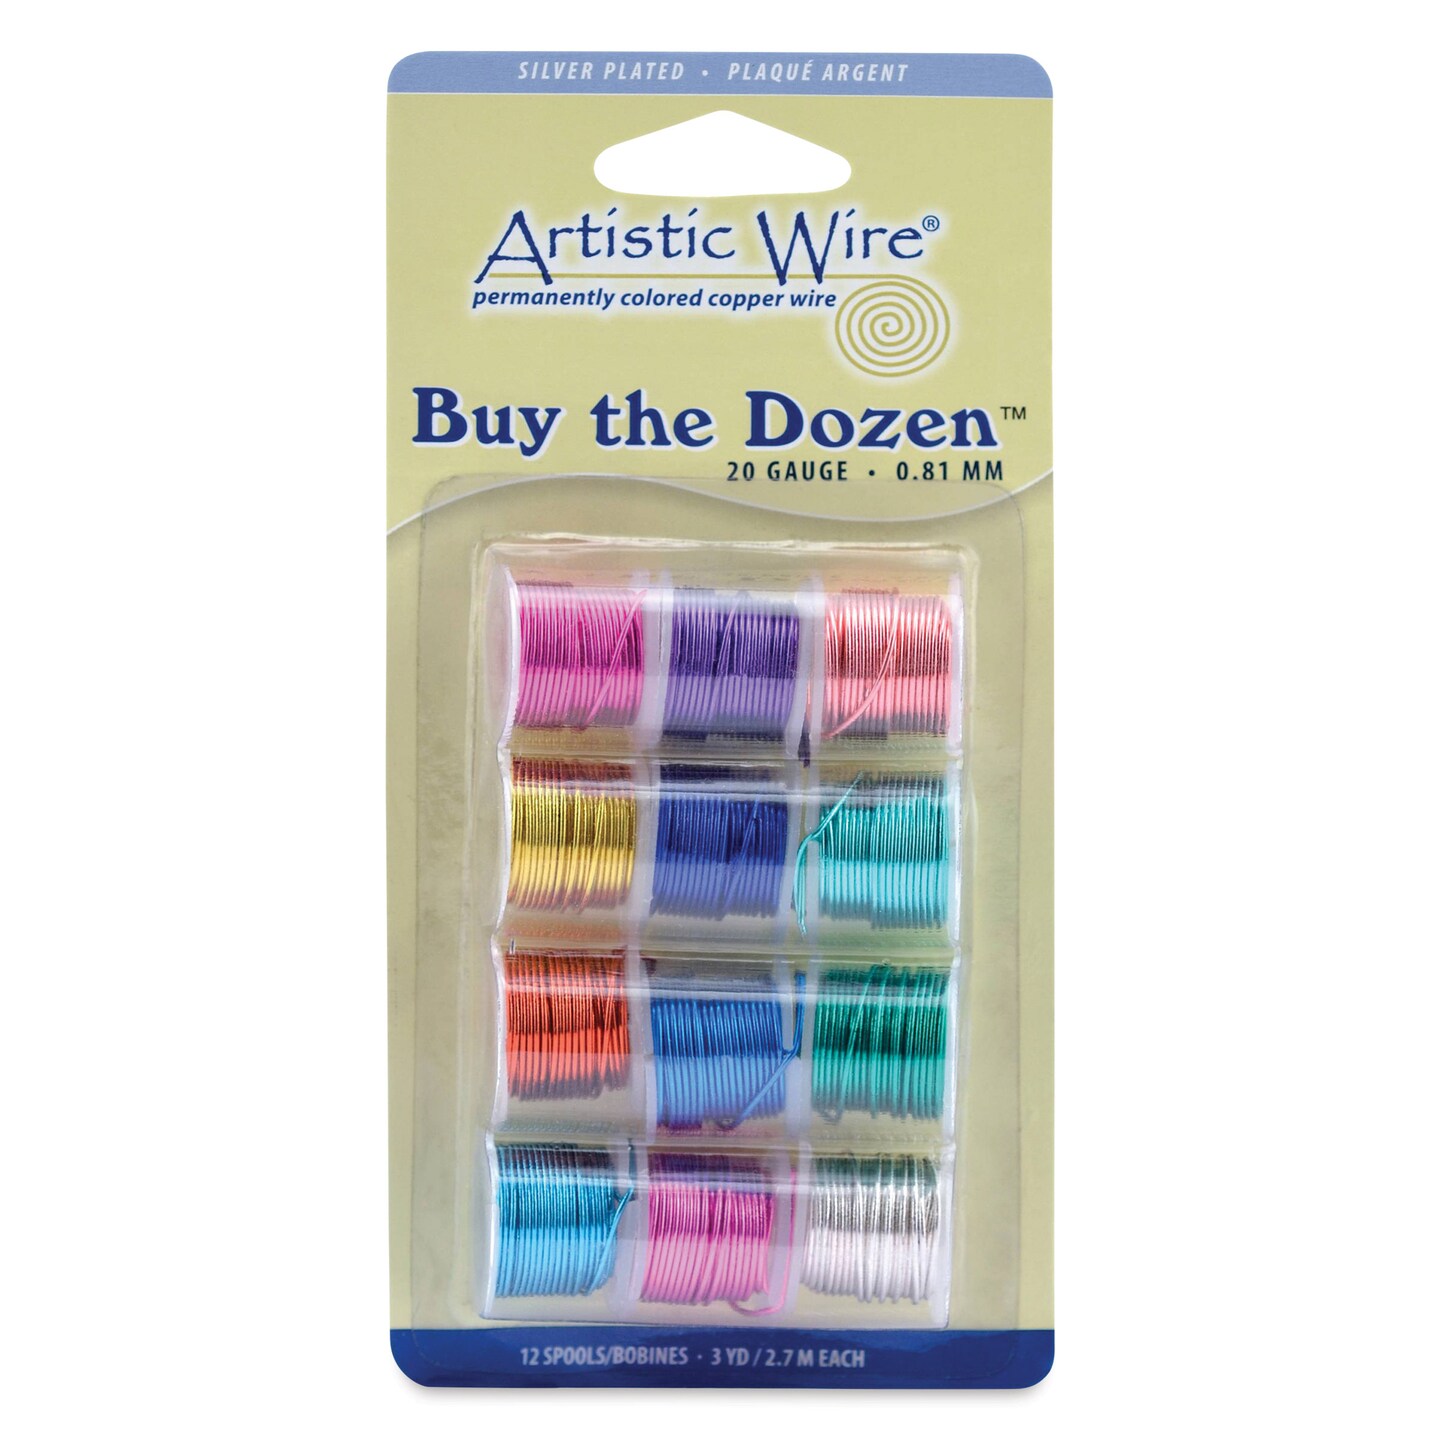 Artistic Wire Silver Plated Copper Craft Wire - Buy-The-Dozen, Assorted Colors, 20 Gauge, 9 ft, Set of 12